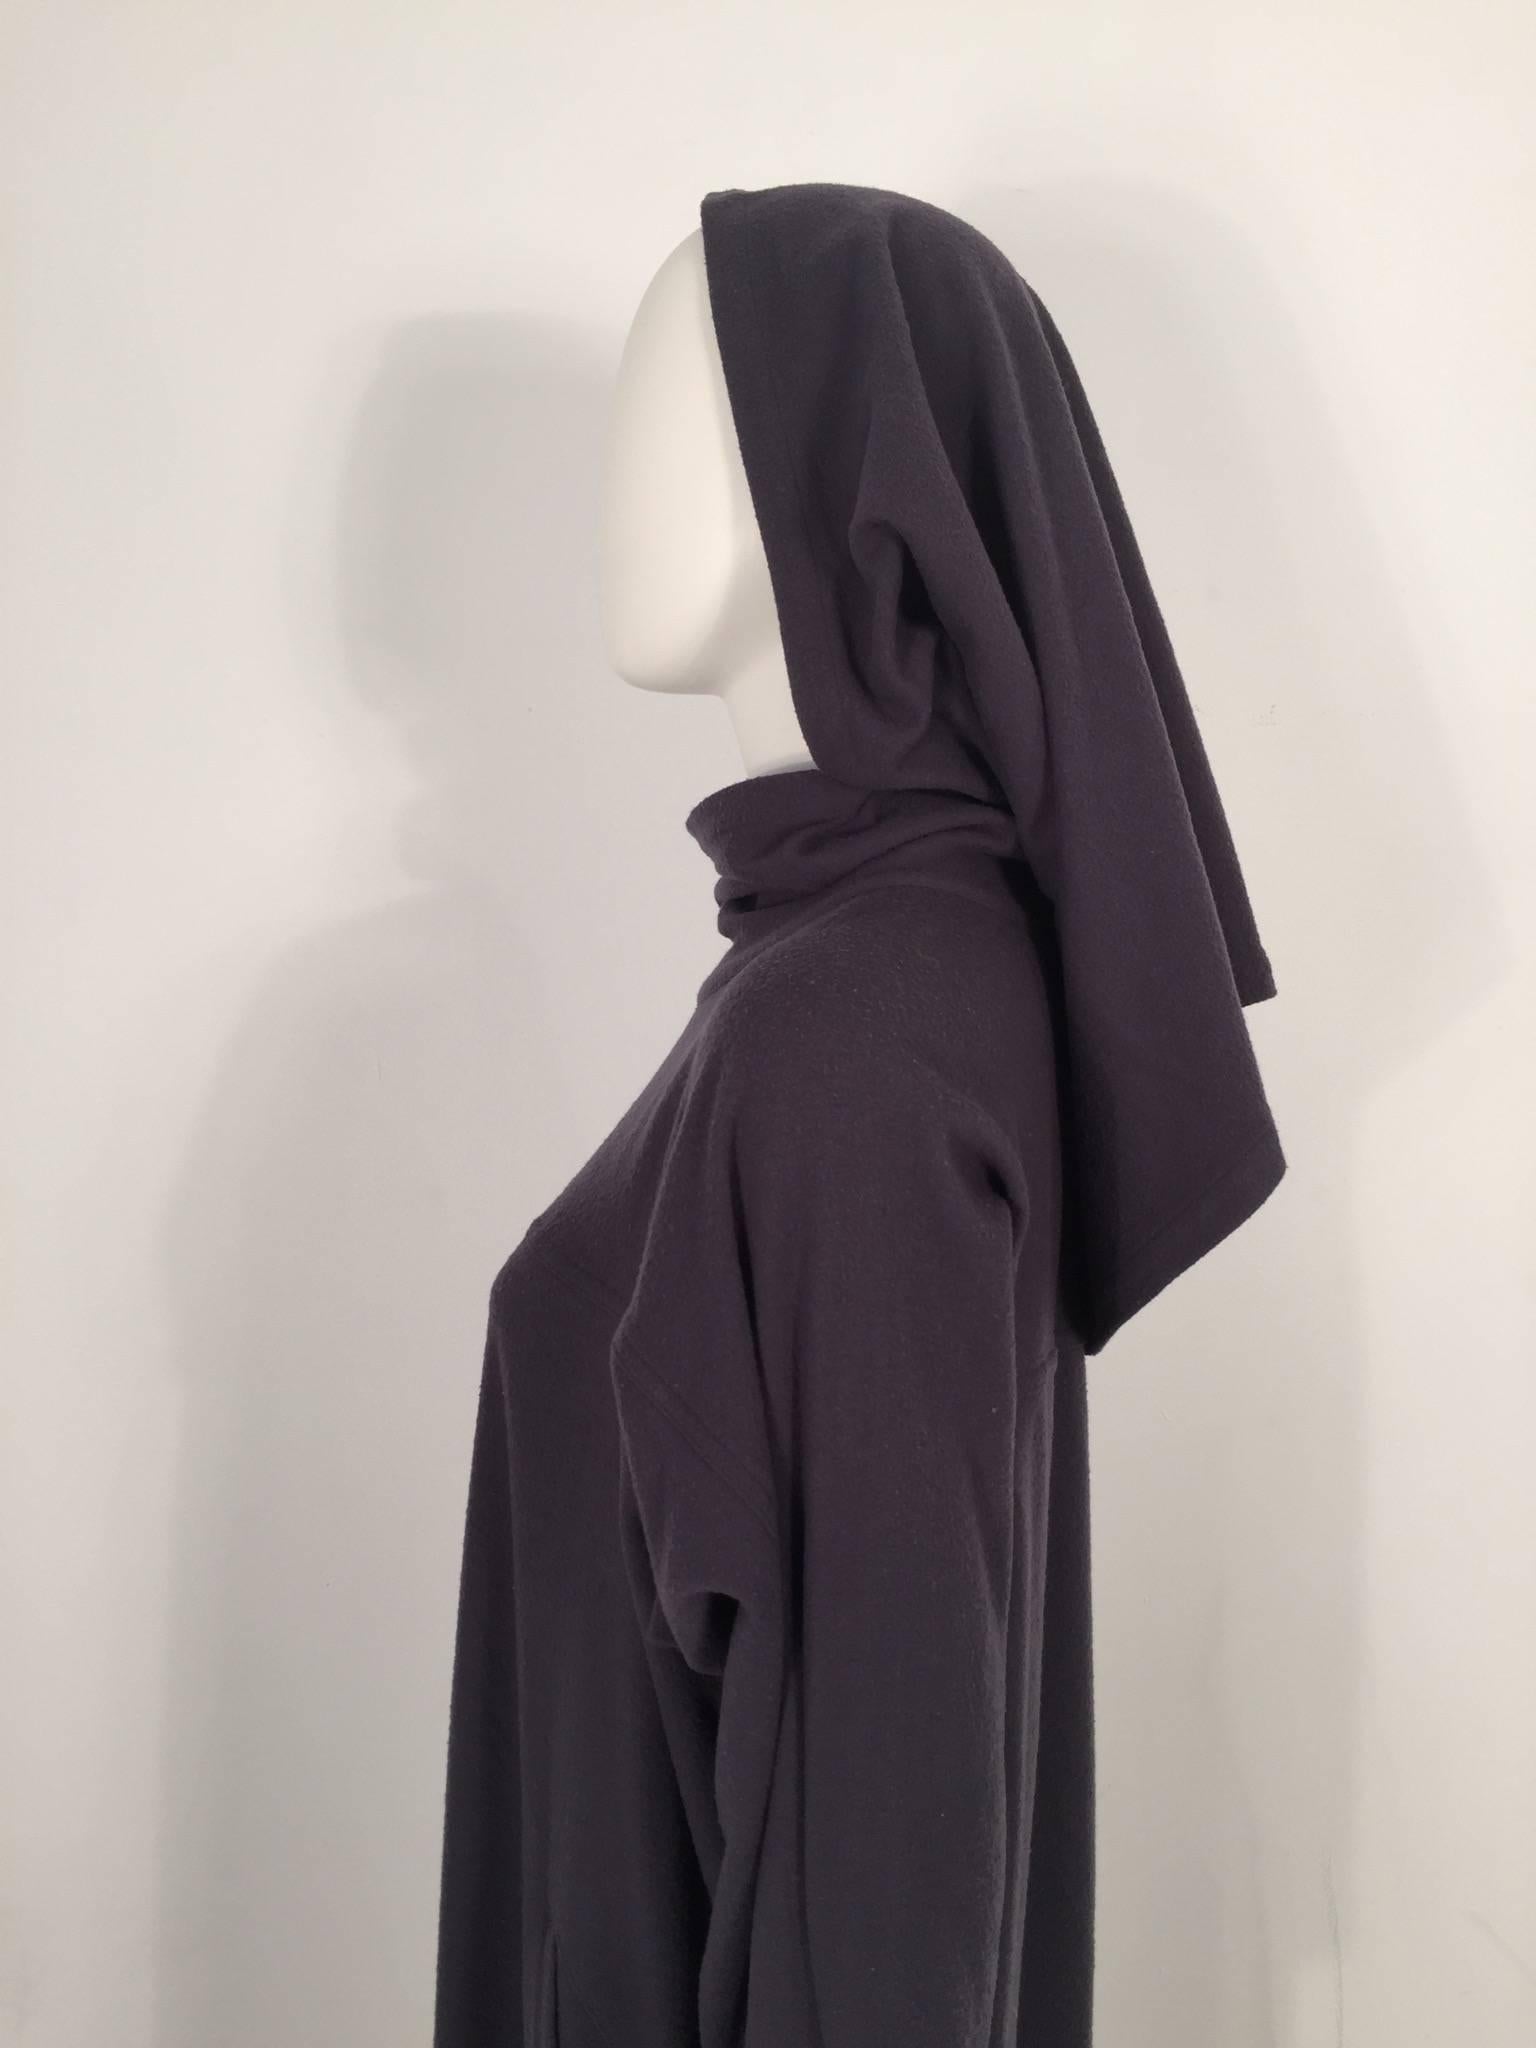 Issey Miyake Iconic Hooded Dress In Excellent Condition For Sale In New York, NY